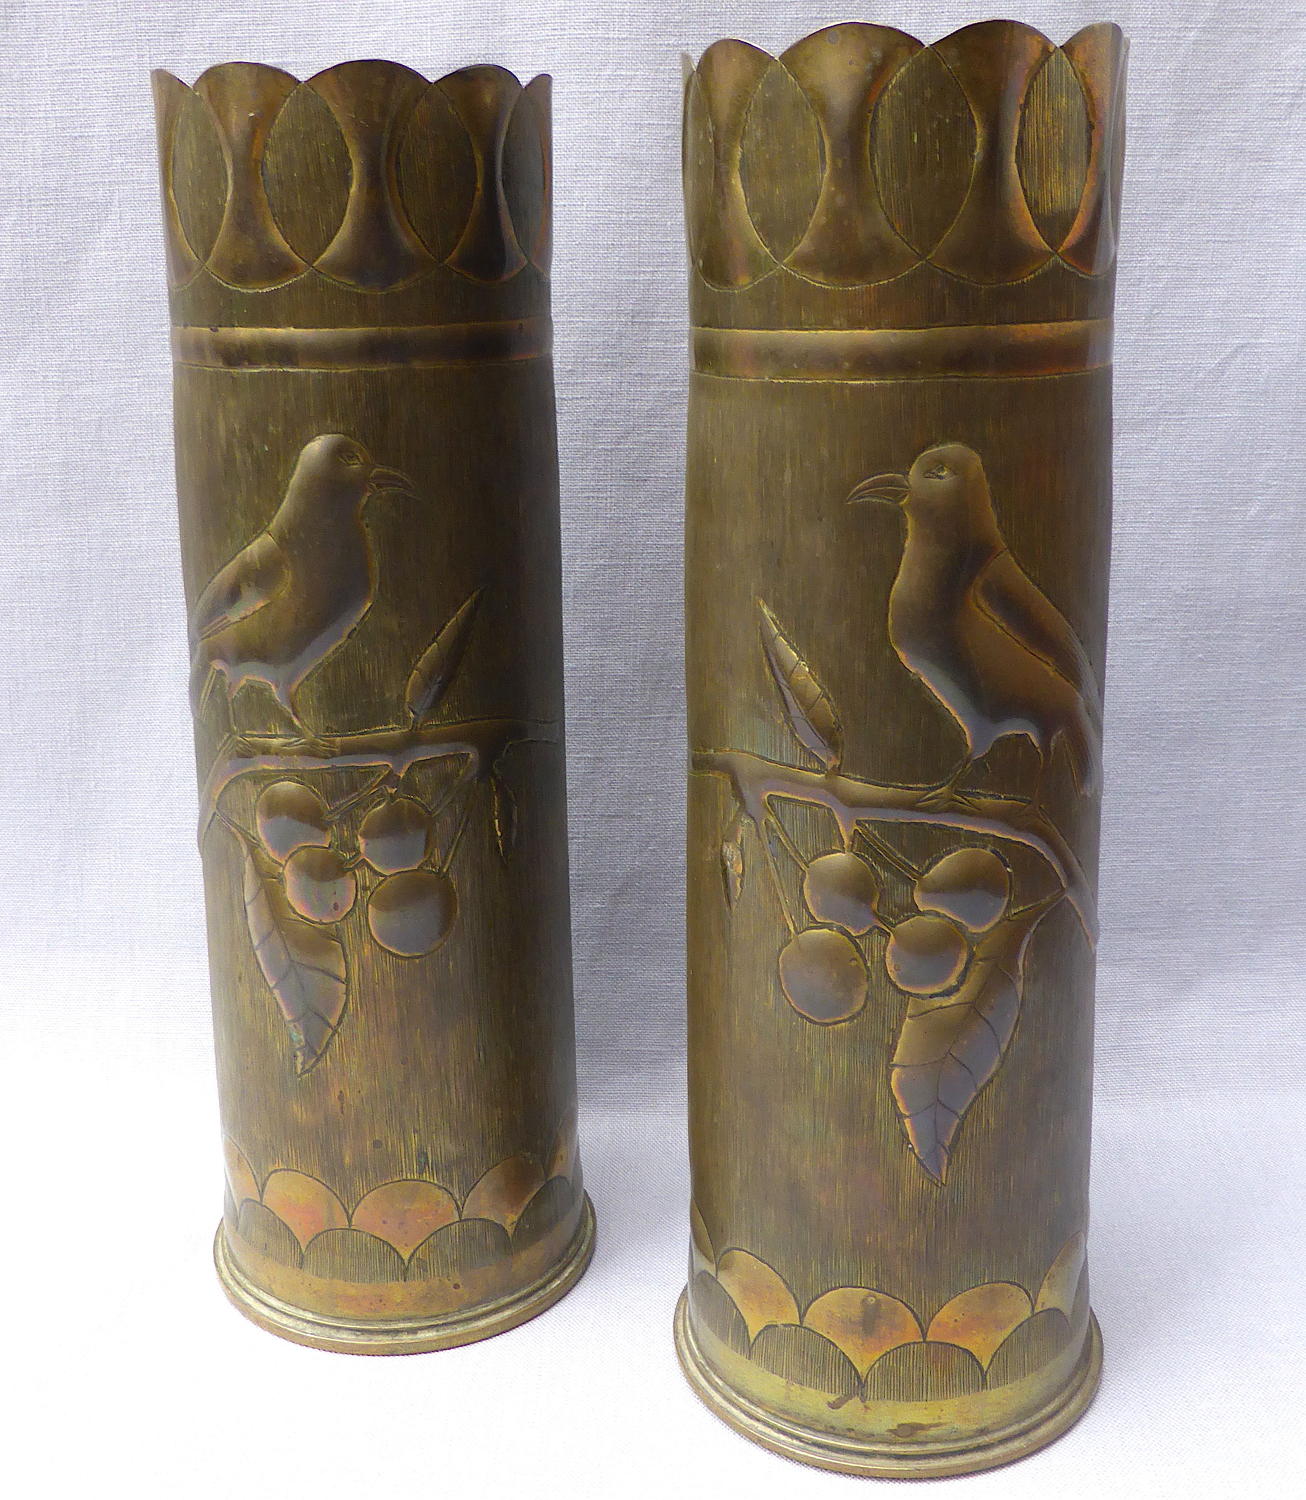 Pair of WWI brass shell case trench art vases